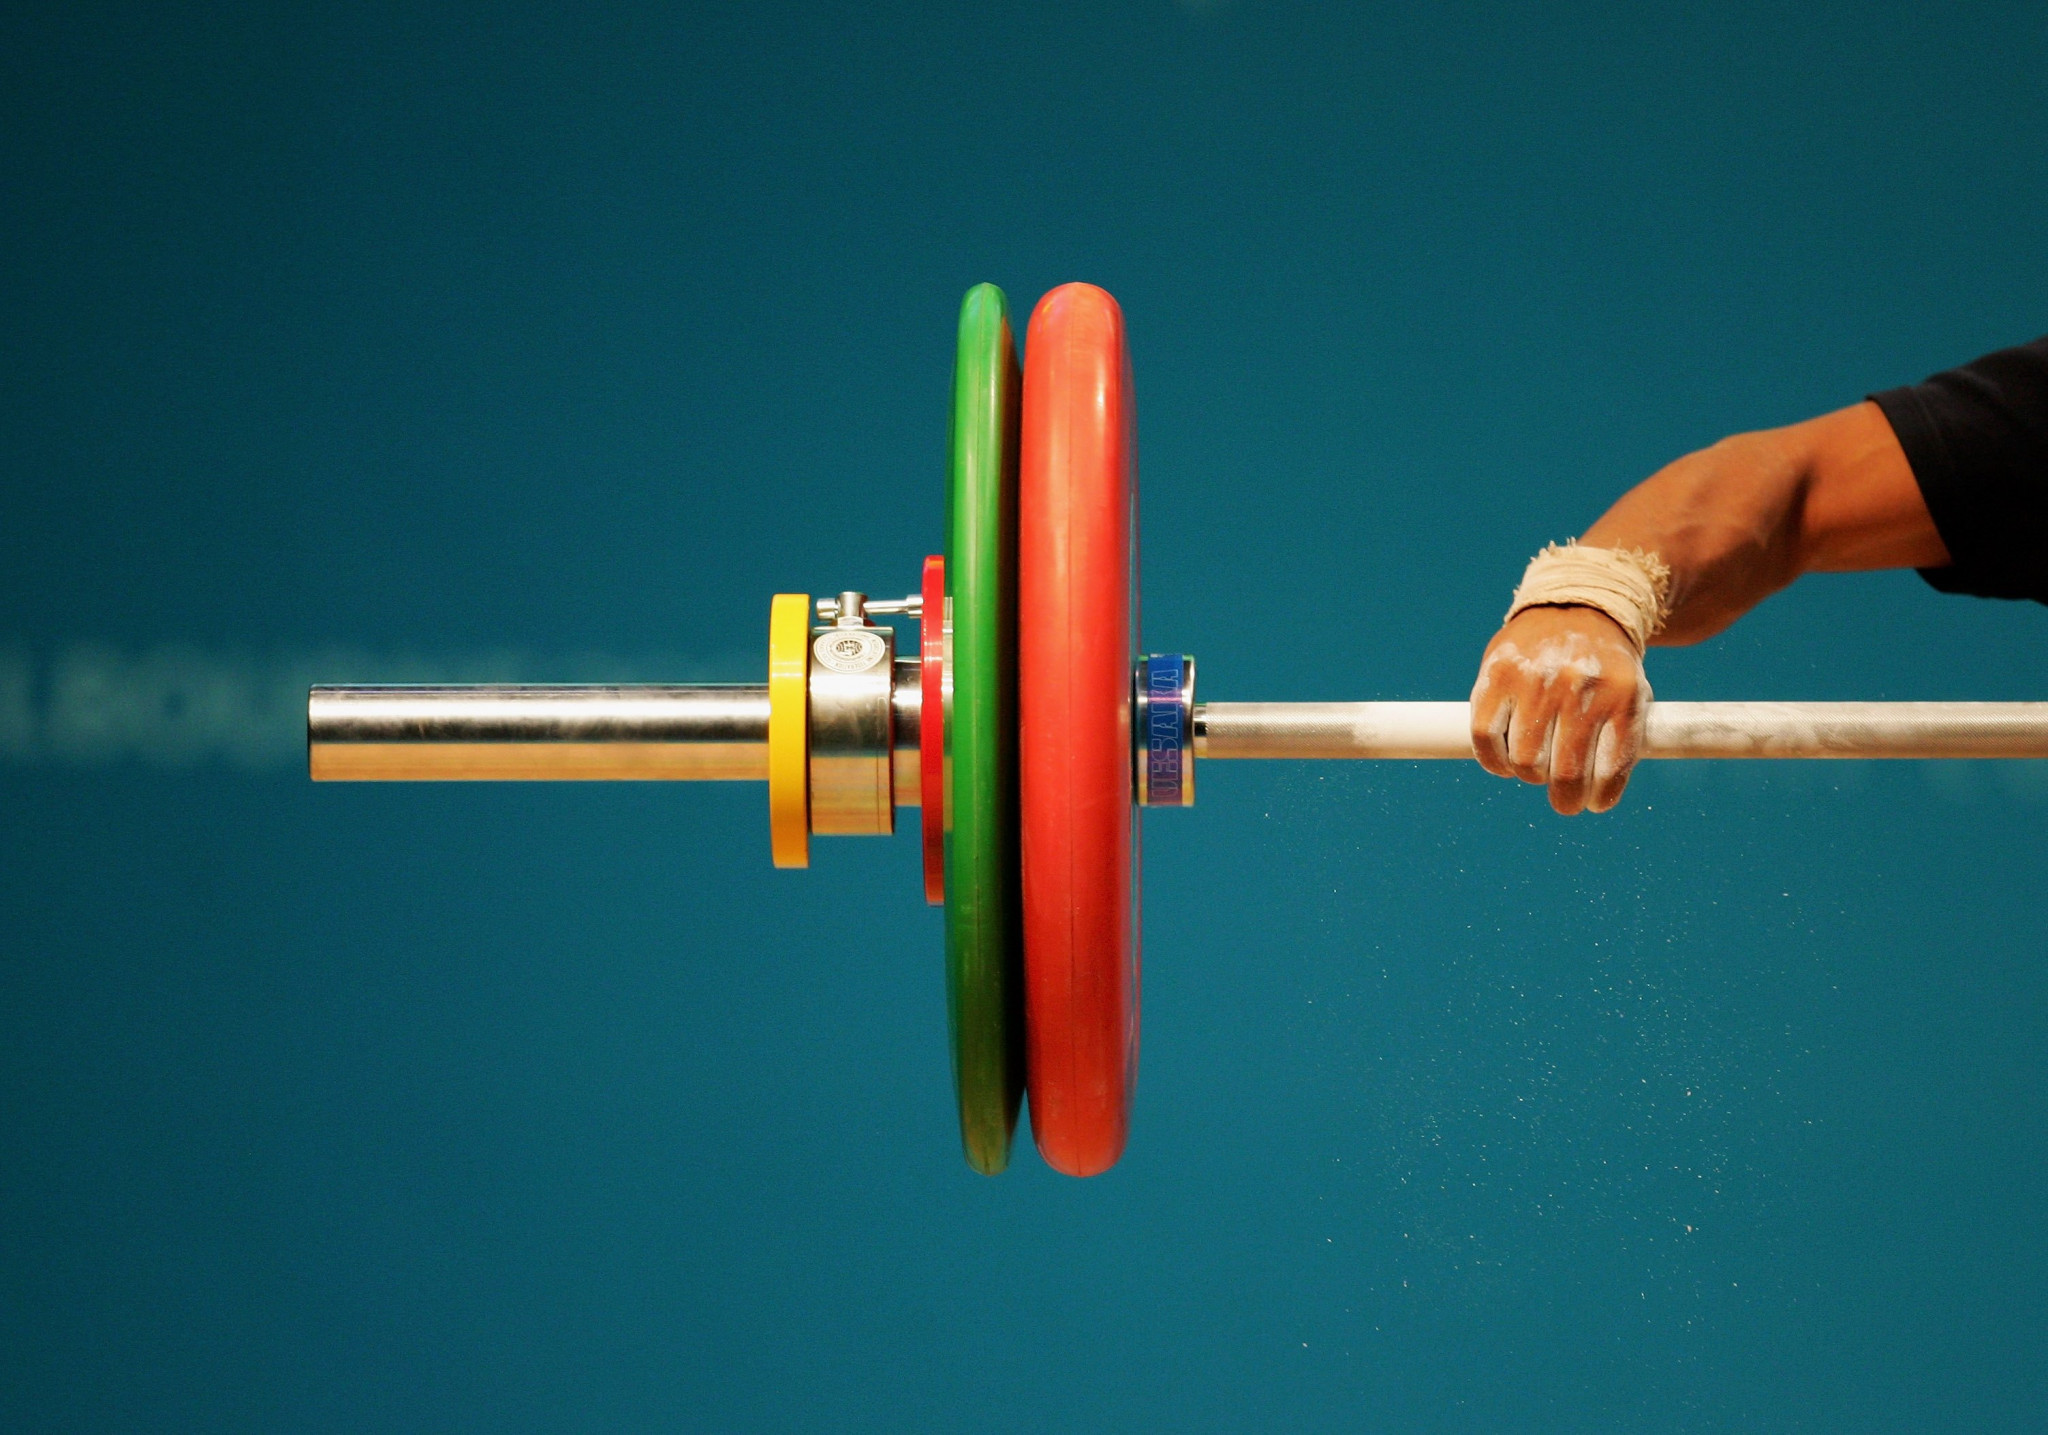 Weightlifting has been hit by another doping case ©Getty Images